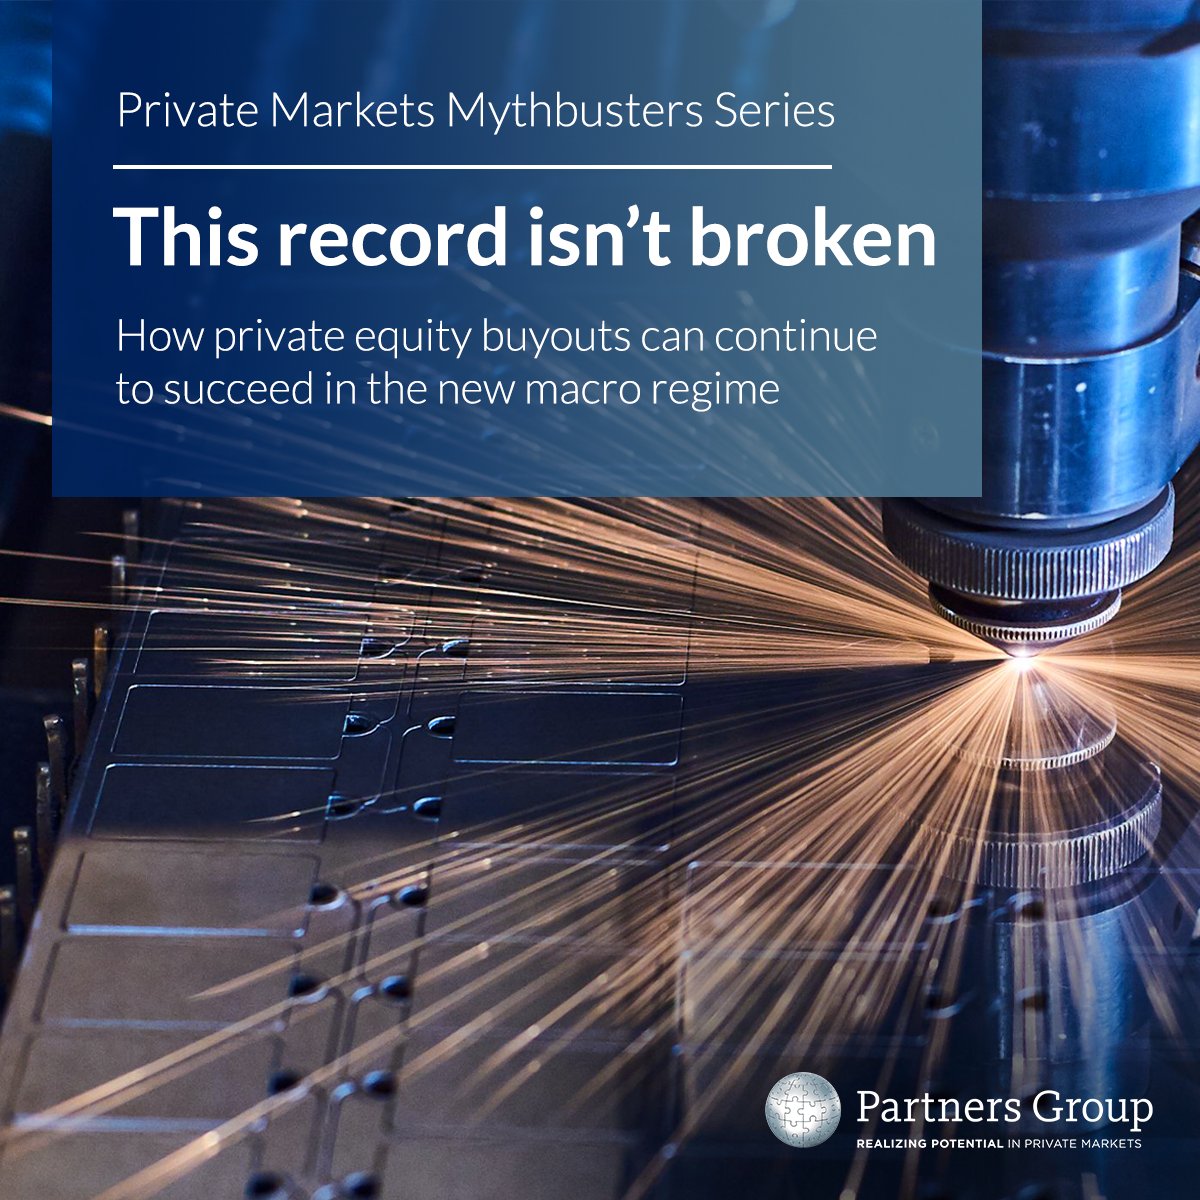 The first paper in our Private Markets Mythbusters Series looks at the private equity buyout model and delves into why we think this model calls for a more thorough analysis. Read the paper here: partnersgroup.com/fileadmin/user…